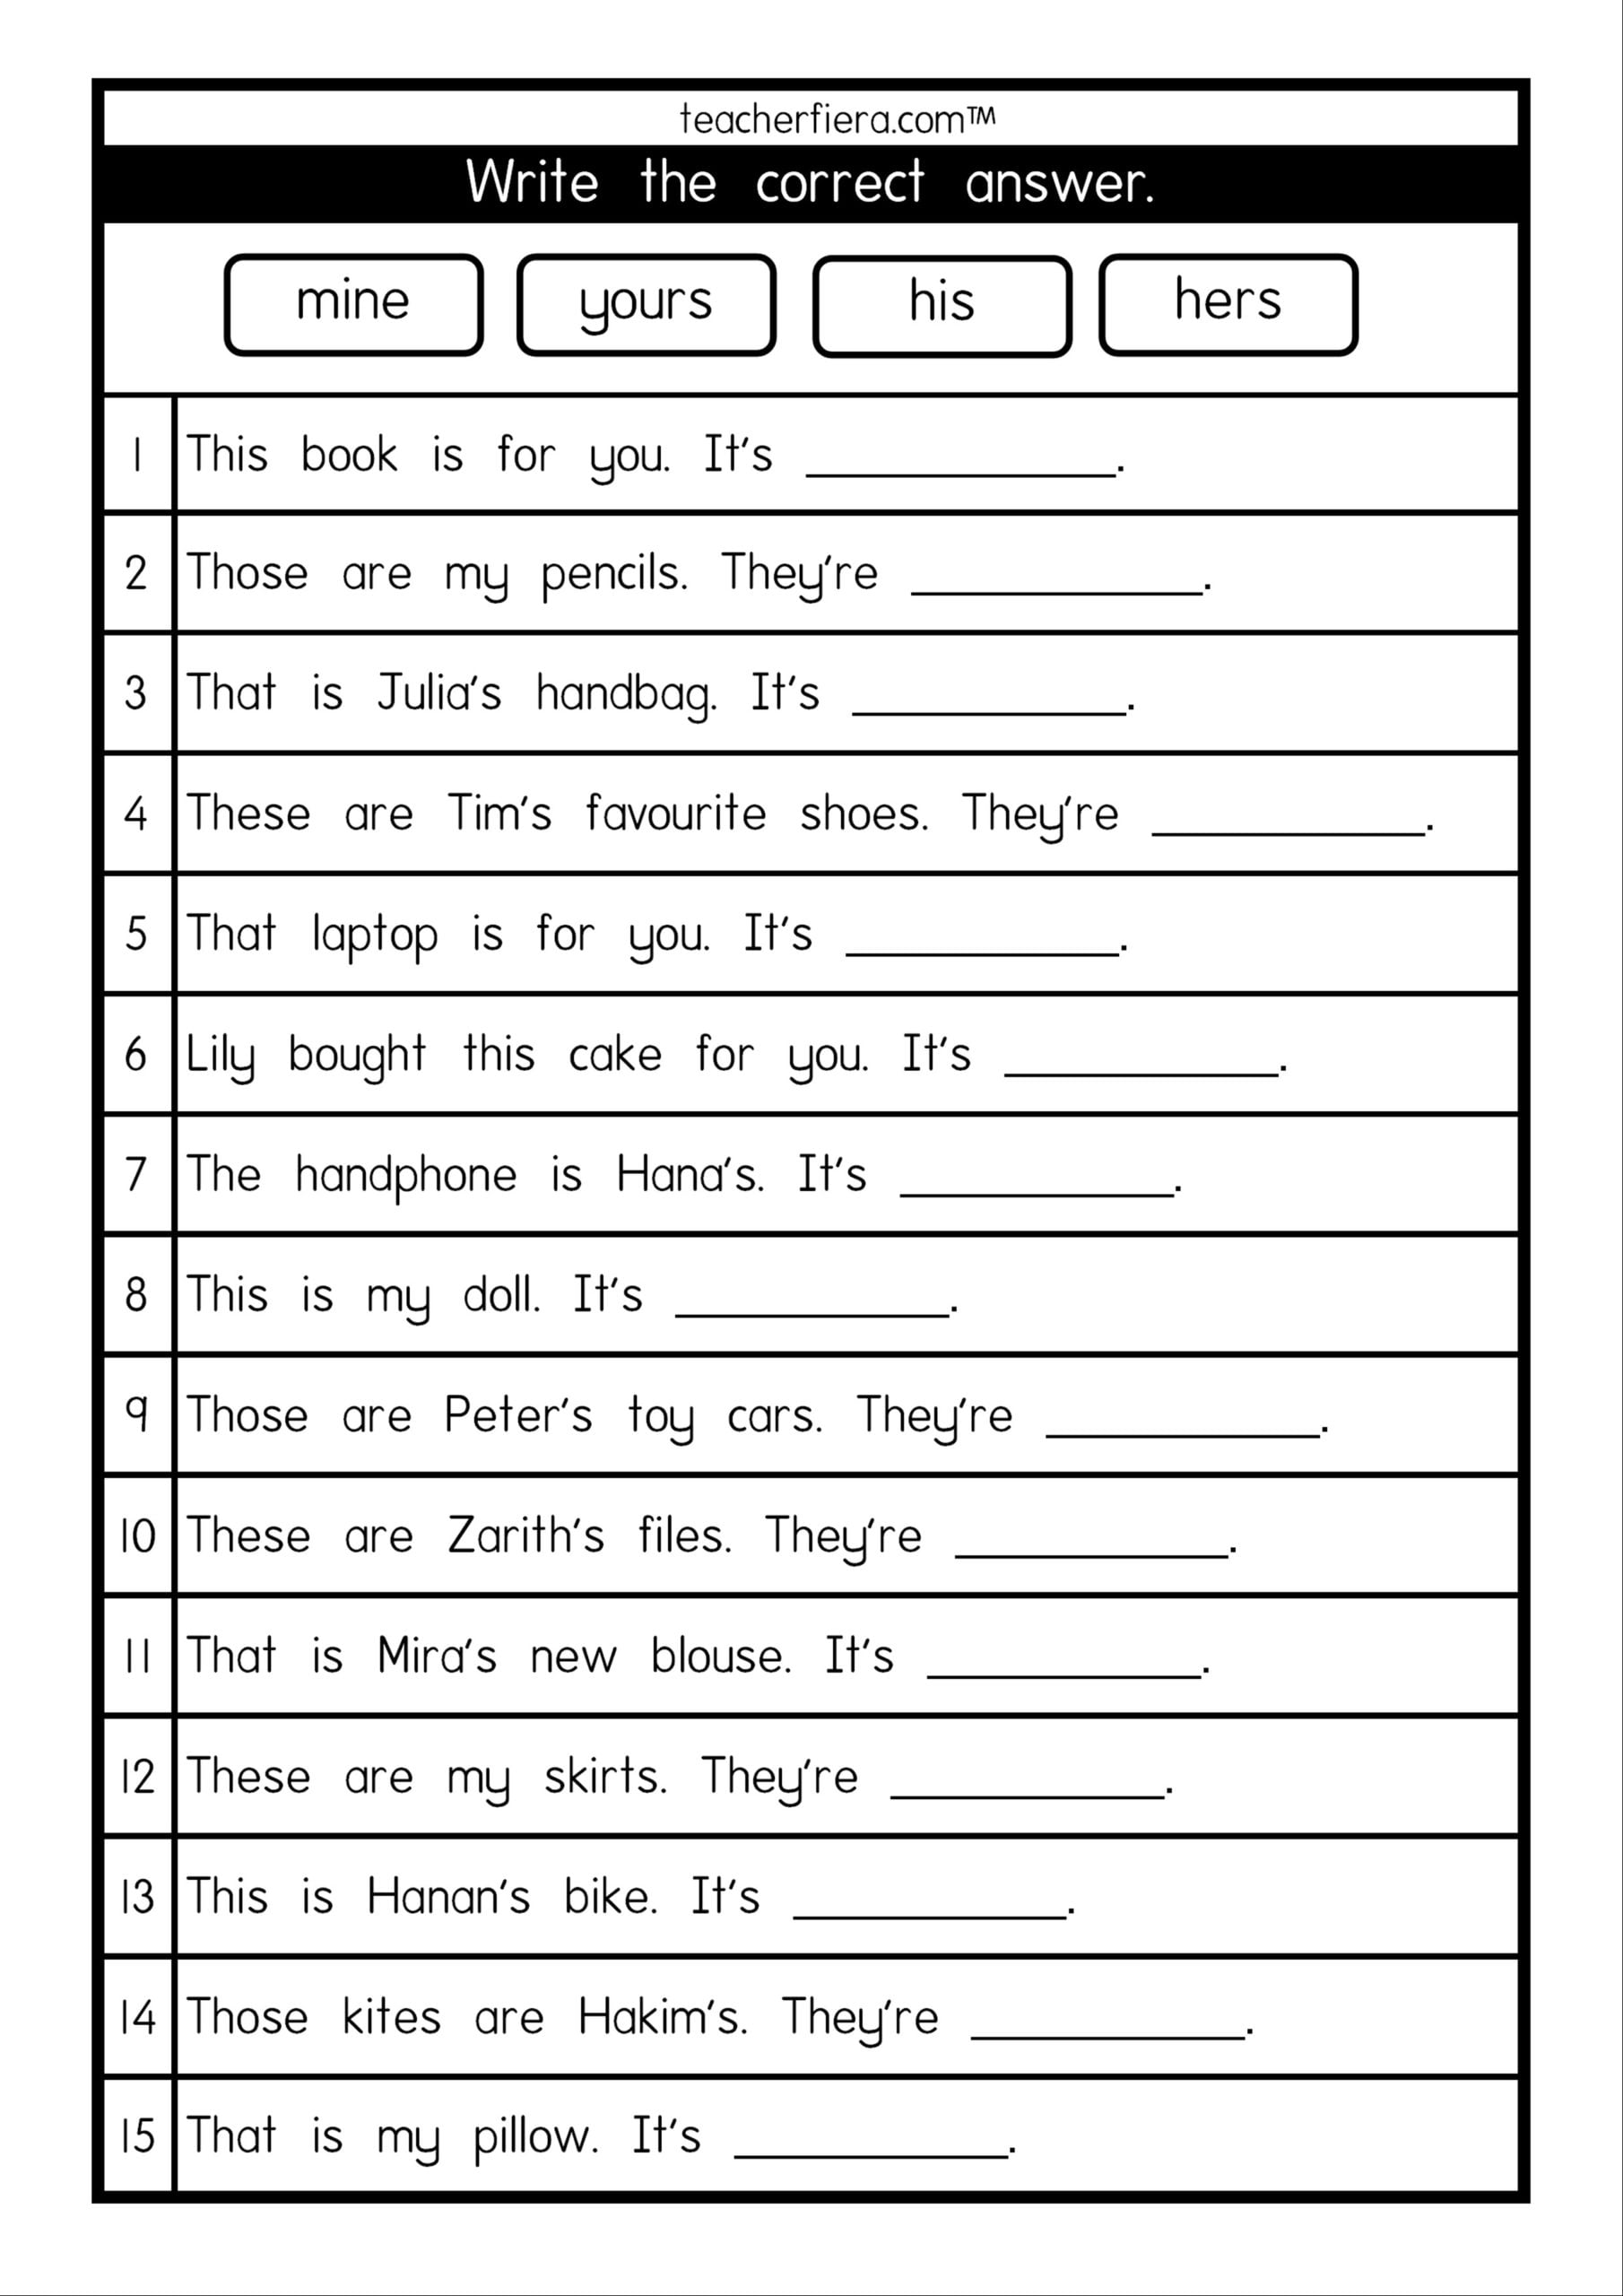 english-year-3-kssr-english-esl-worksheets-for-distance-learning-and-physical-classrooms-pin